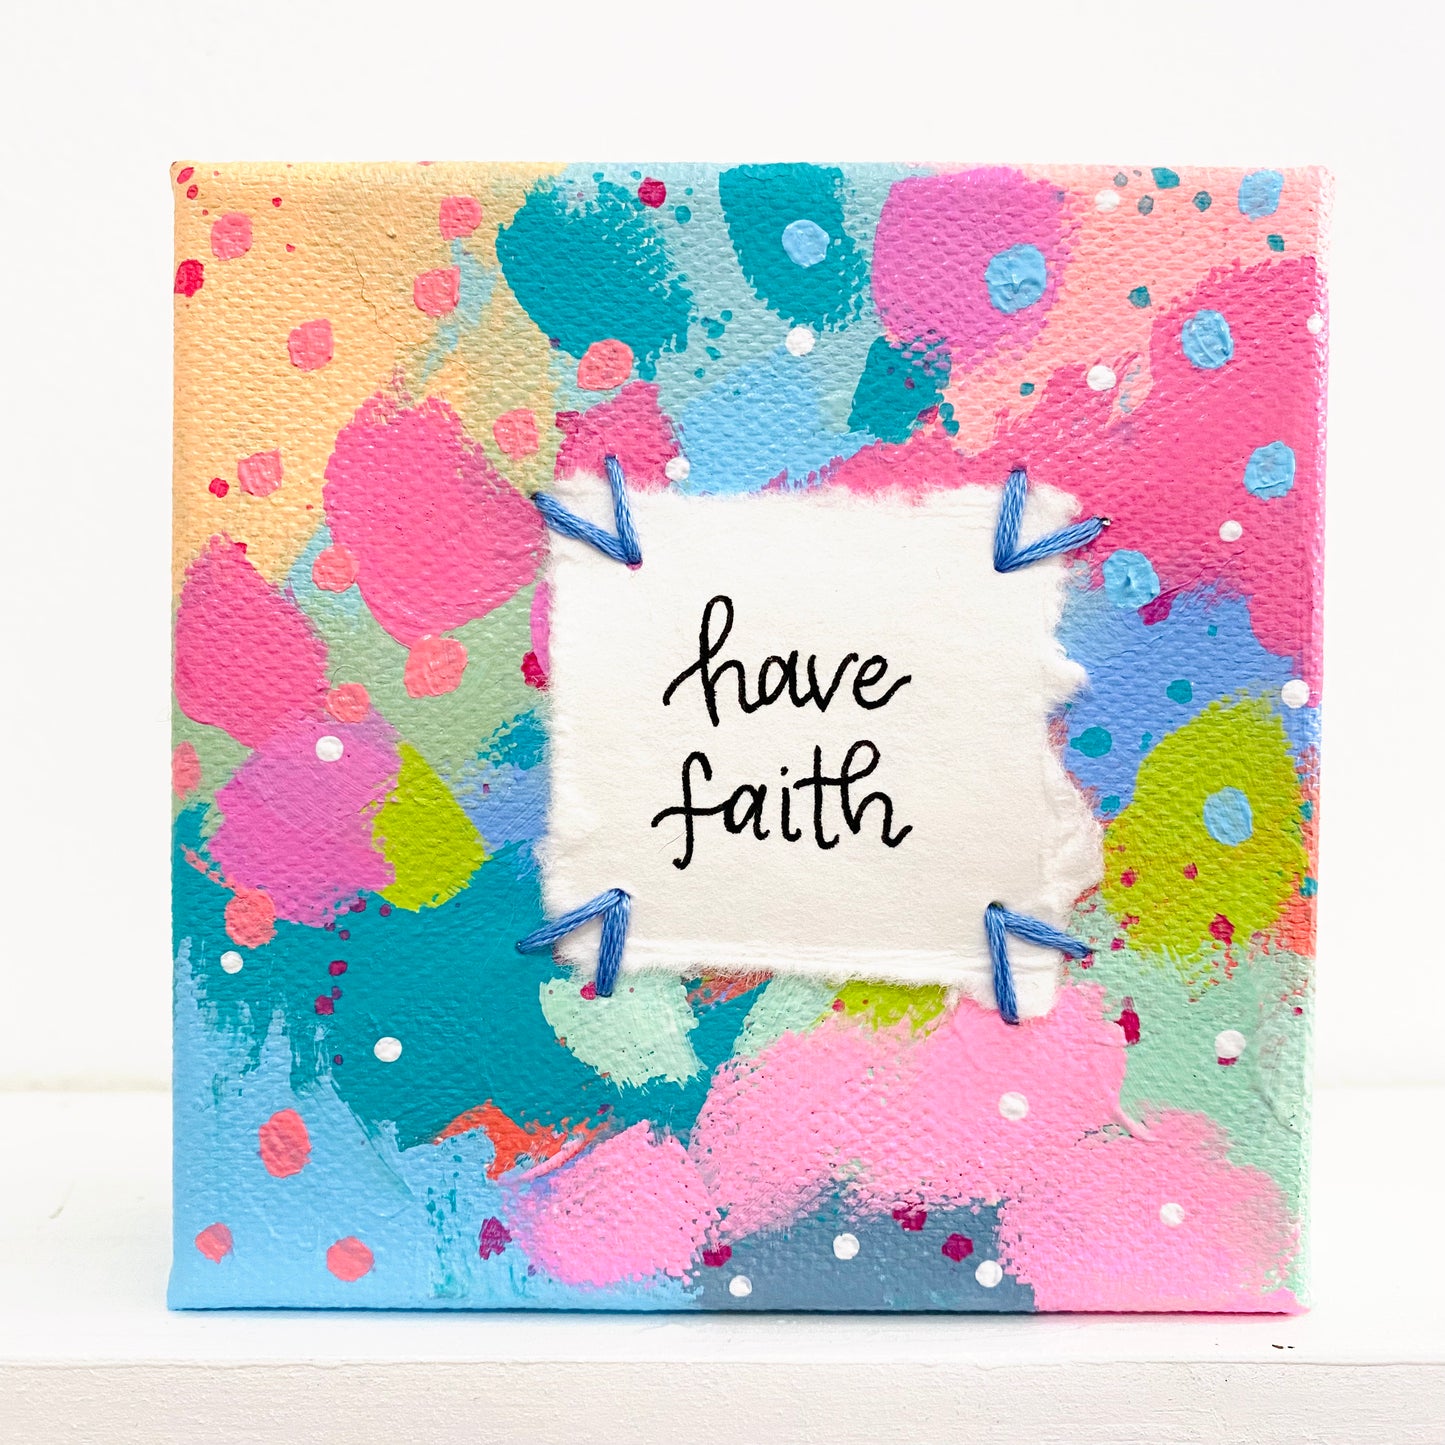 Have Faith 4x4 inch original abstract canvas with embroidery thread accents